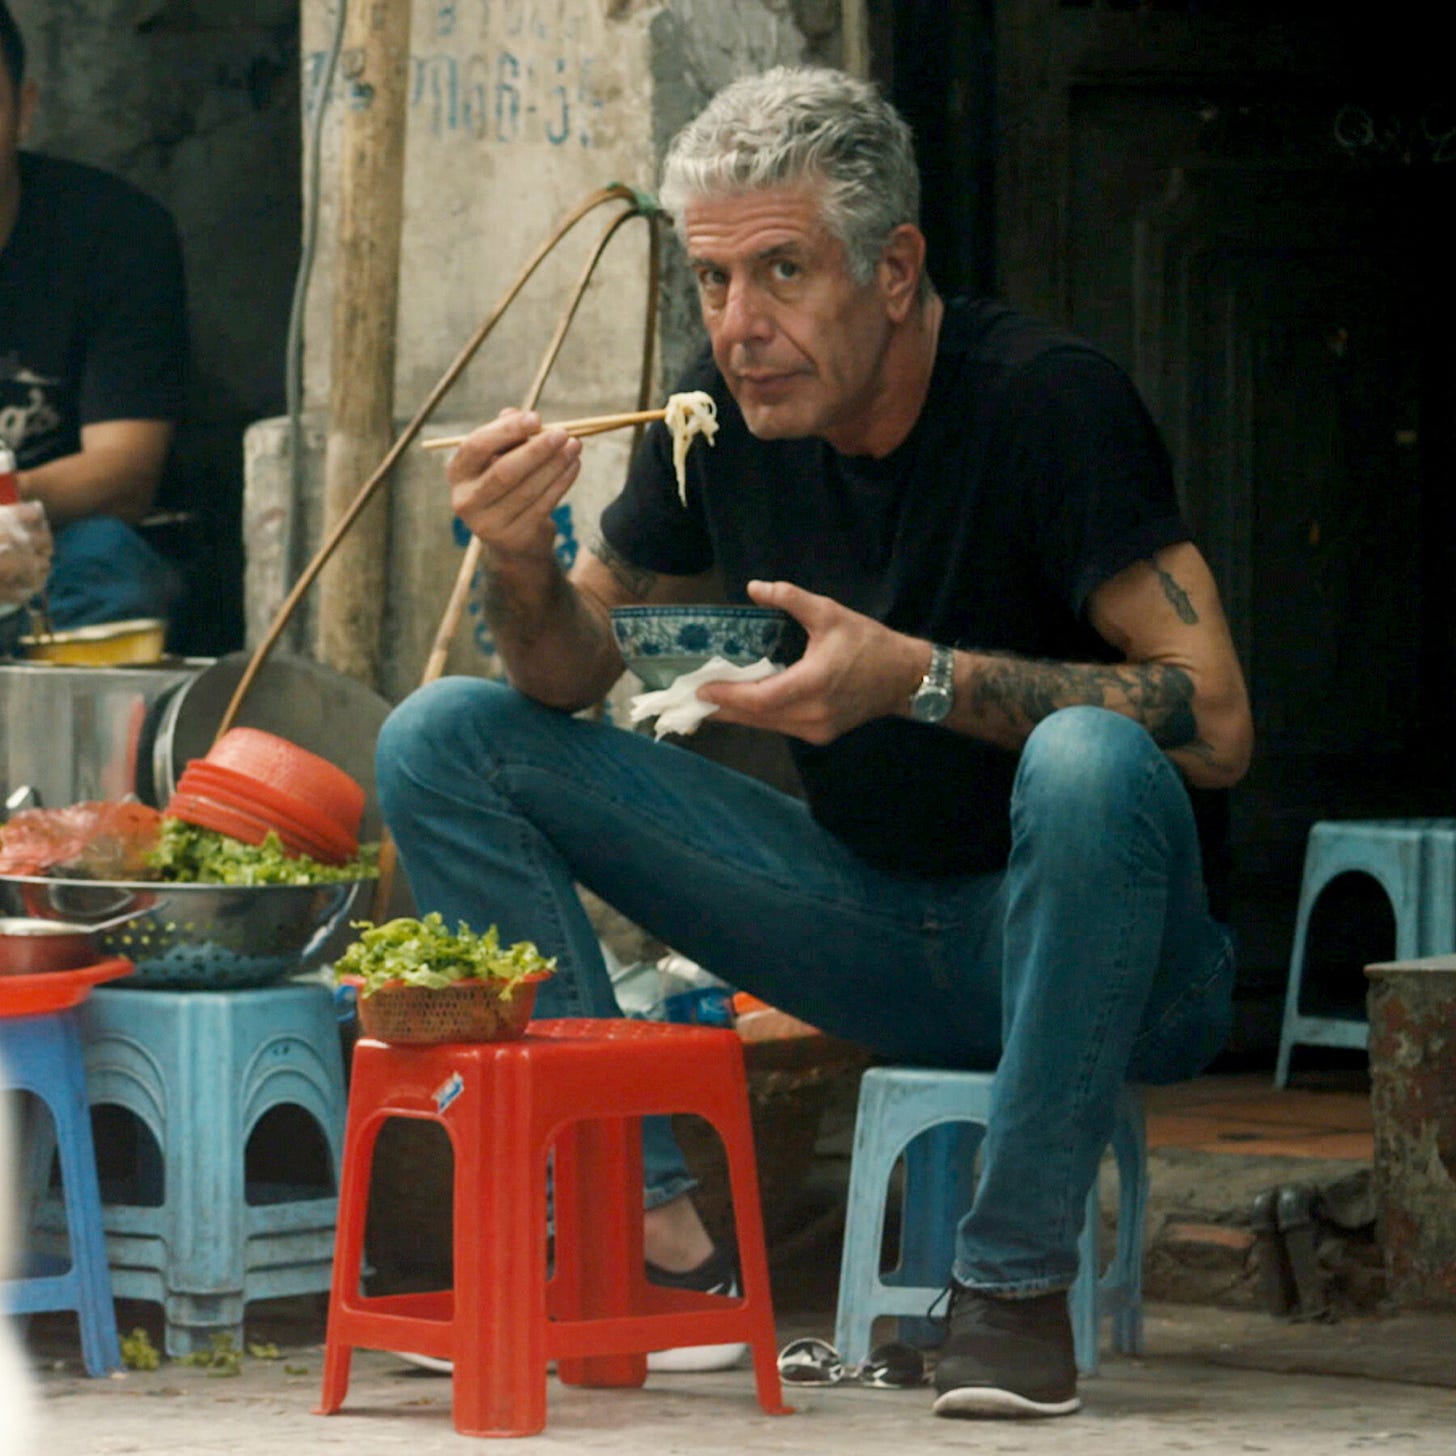 Anthony Bourdain &#39;Roadrunner&#39; Documentary Seeks to Understand His Death,  Career and Struggles - The New York Times